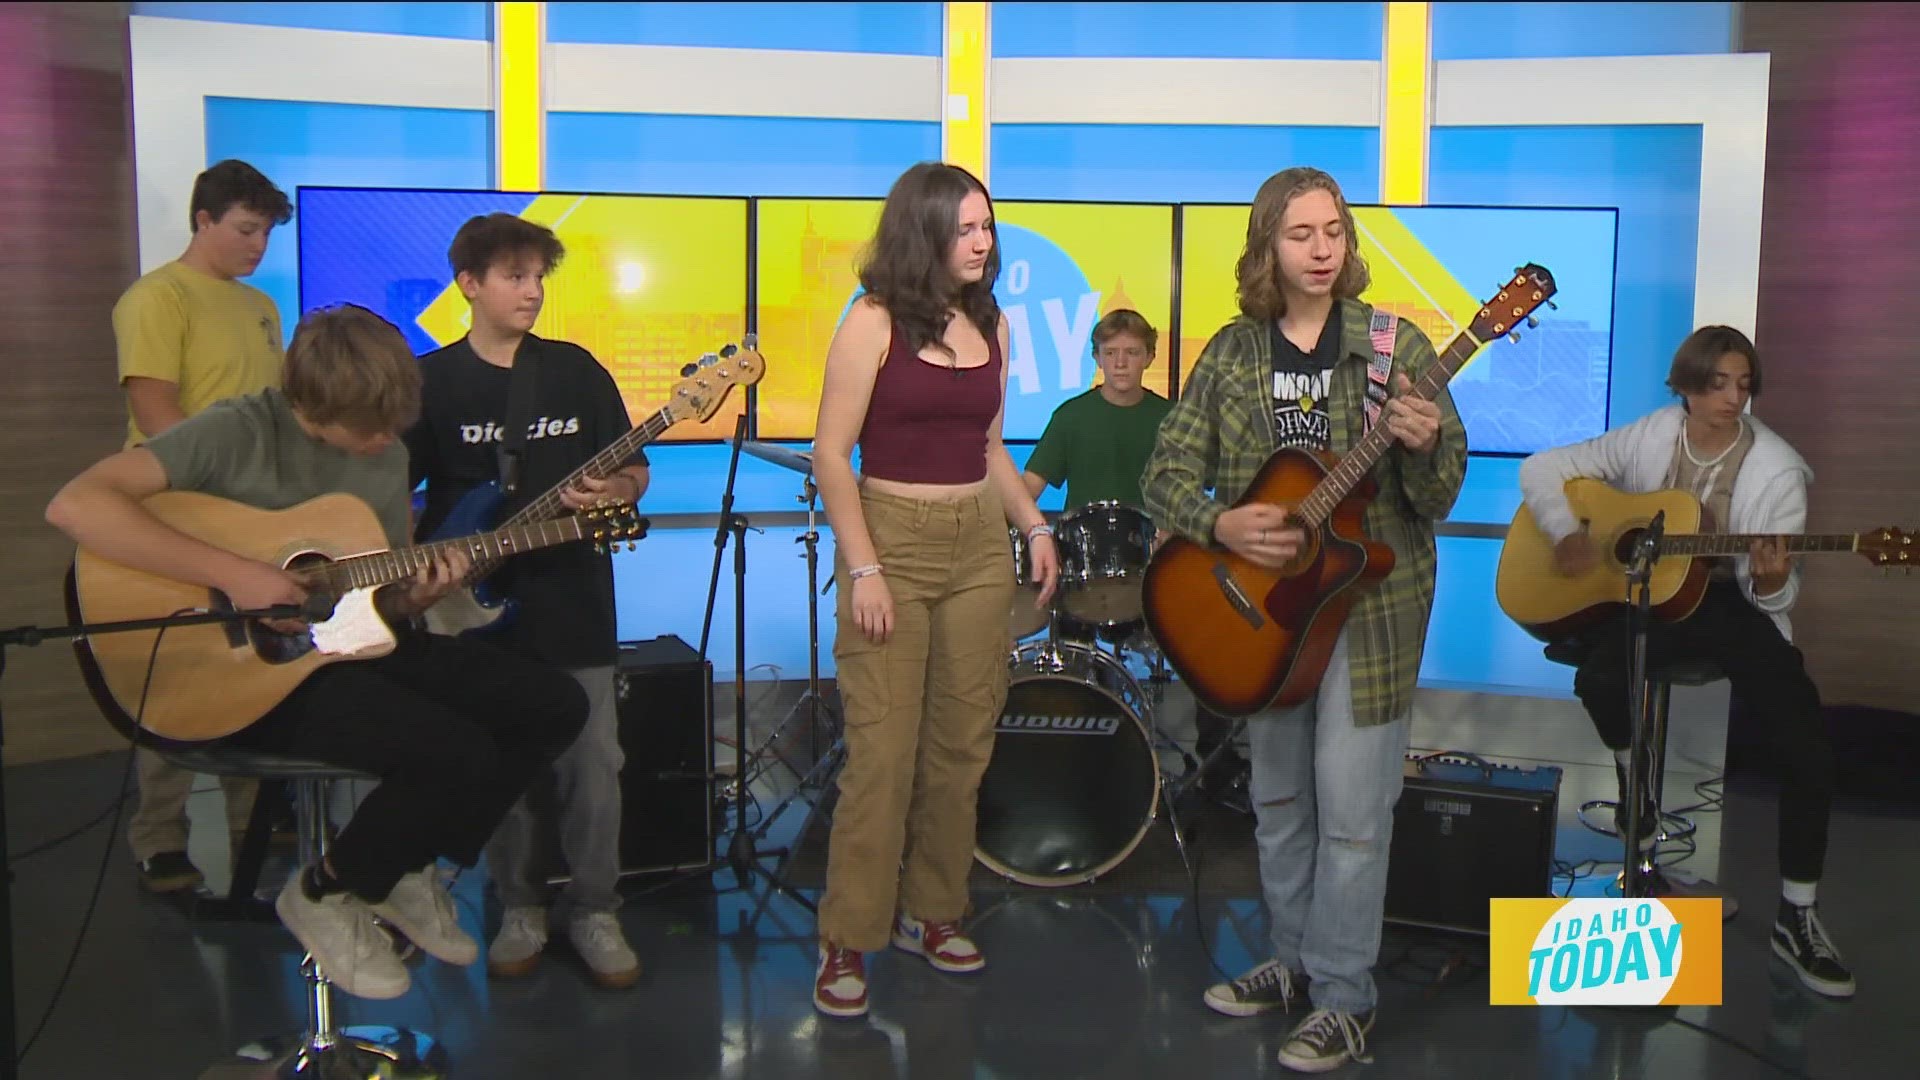 Idaho Fine Arts Academy students perform outside of school as rock band ‘Live Wire.’ Idaho Today’s Mellisa Paul gets the details.